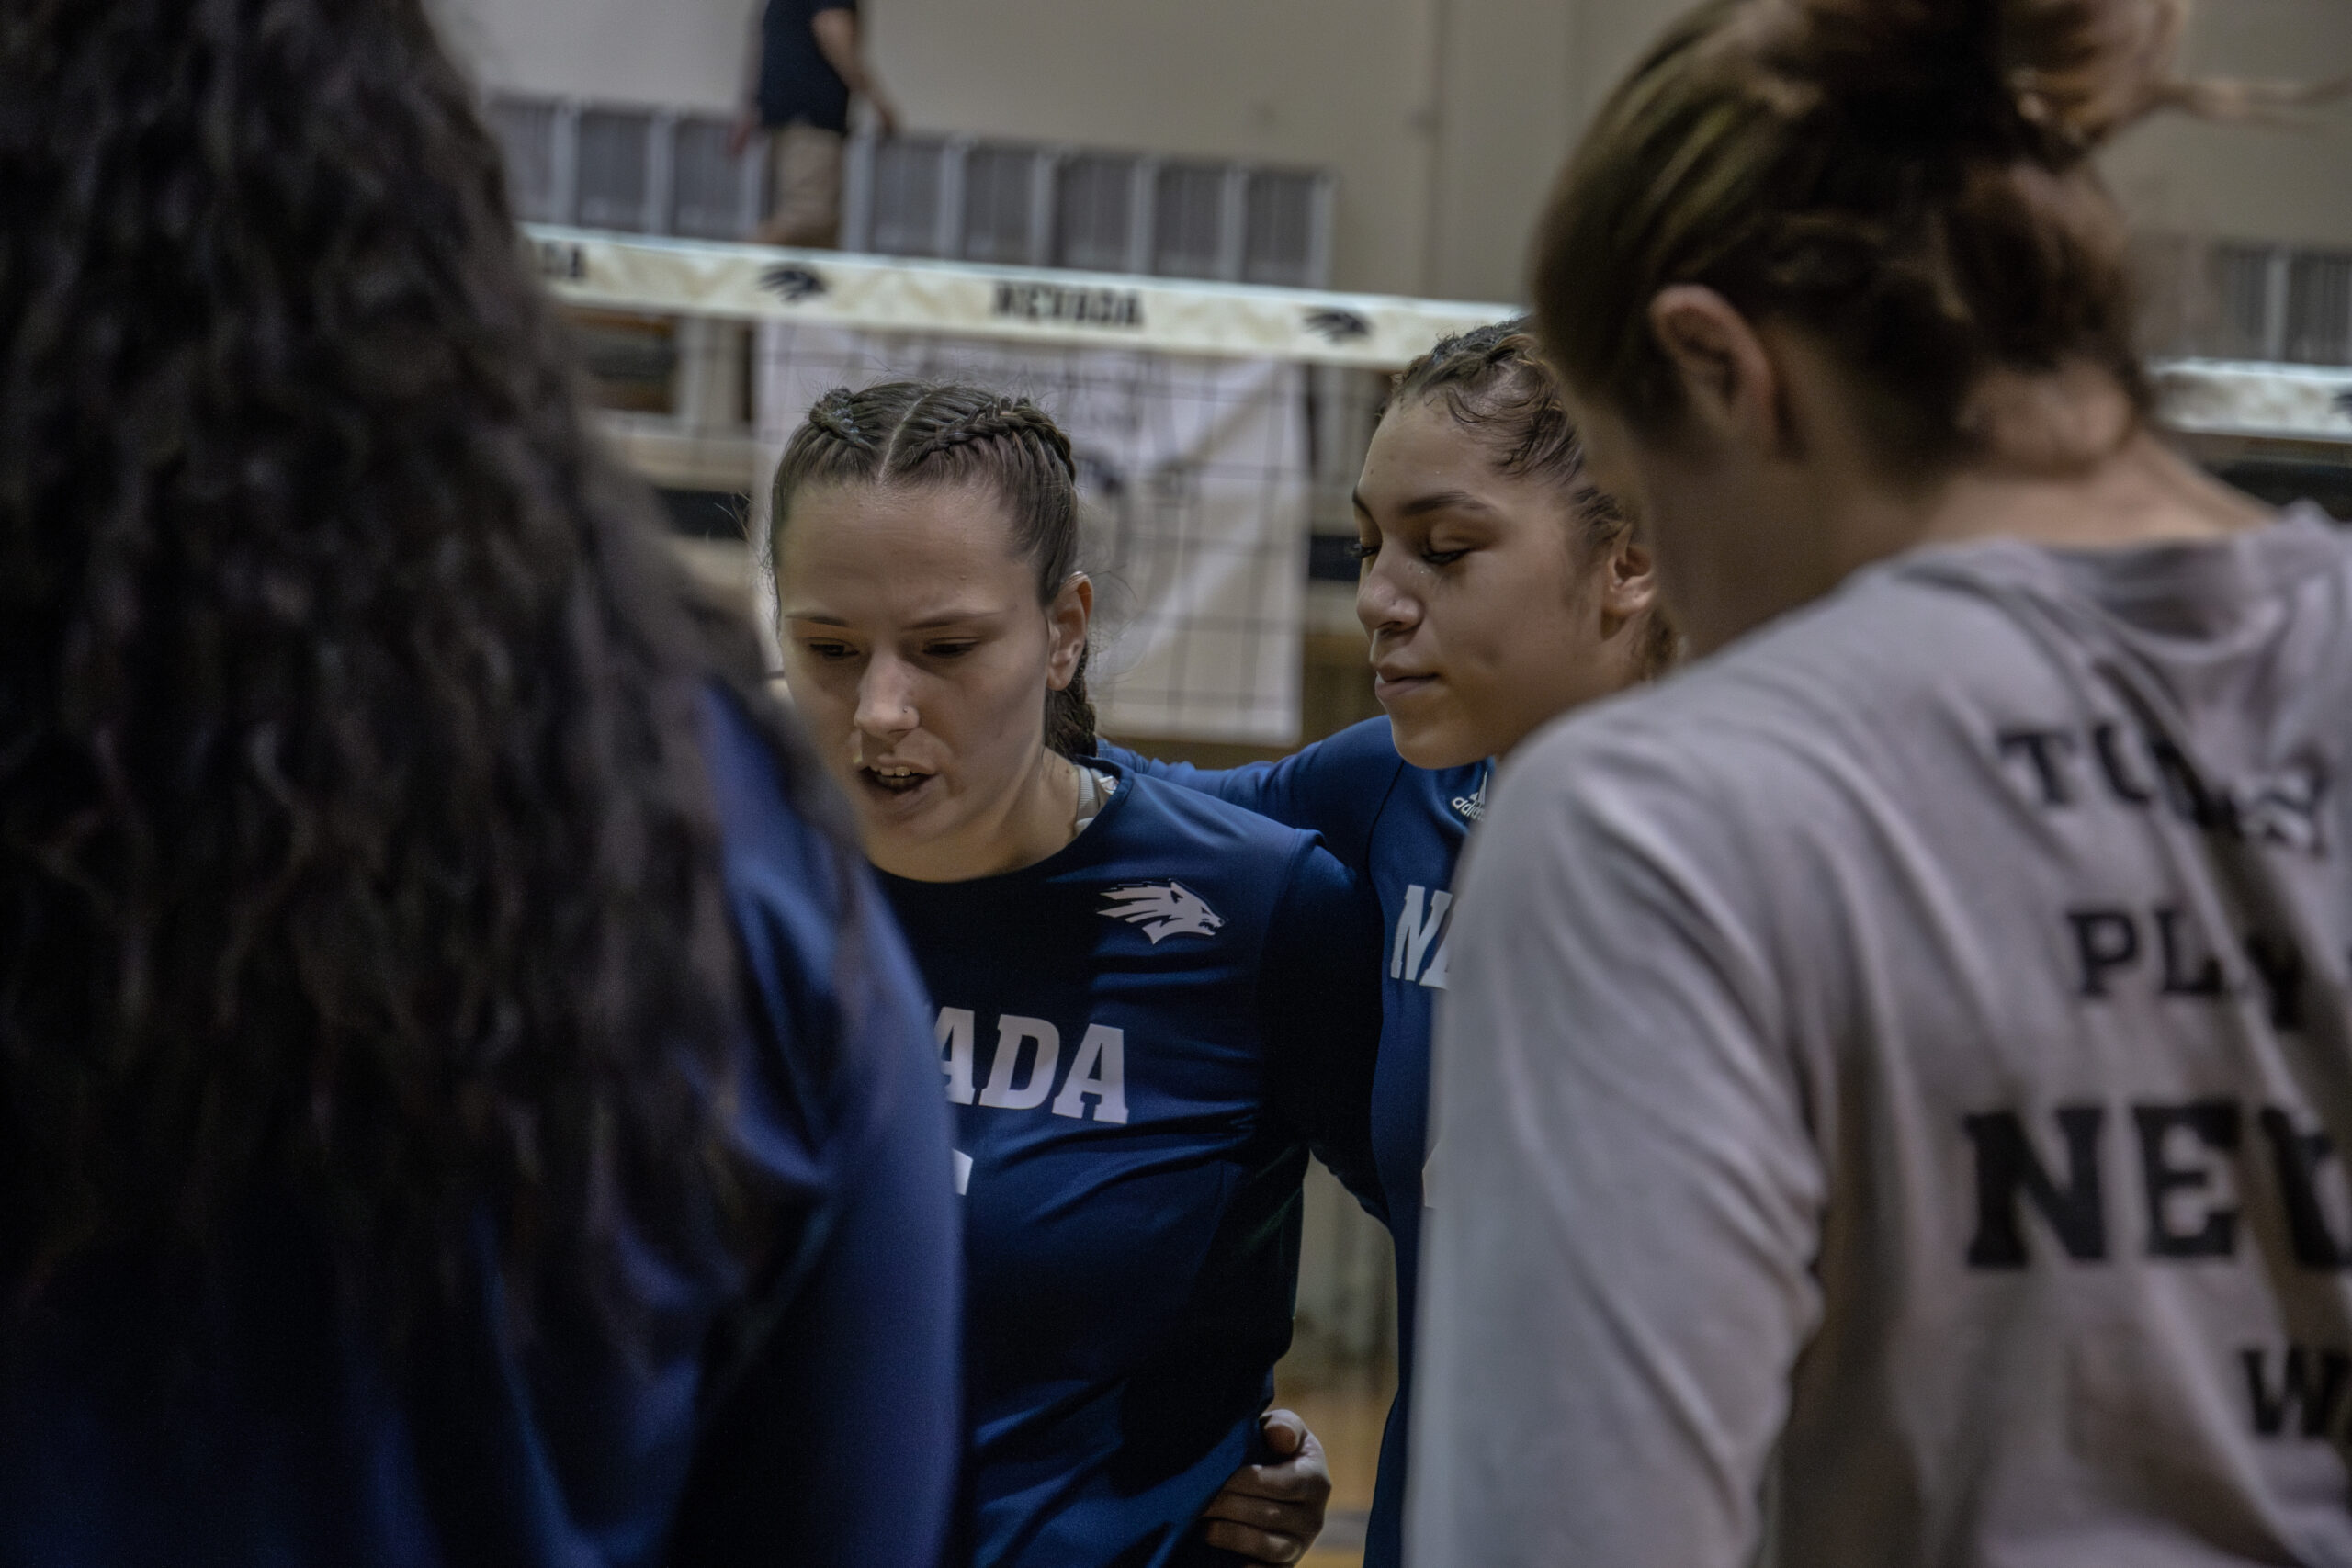 Nevada Volleyball loses 1-3 to Fresno State. Sees Major Lineup Changes Halfway Through The Season